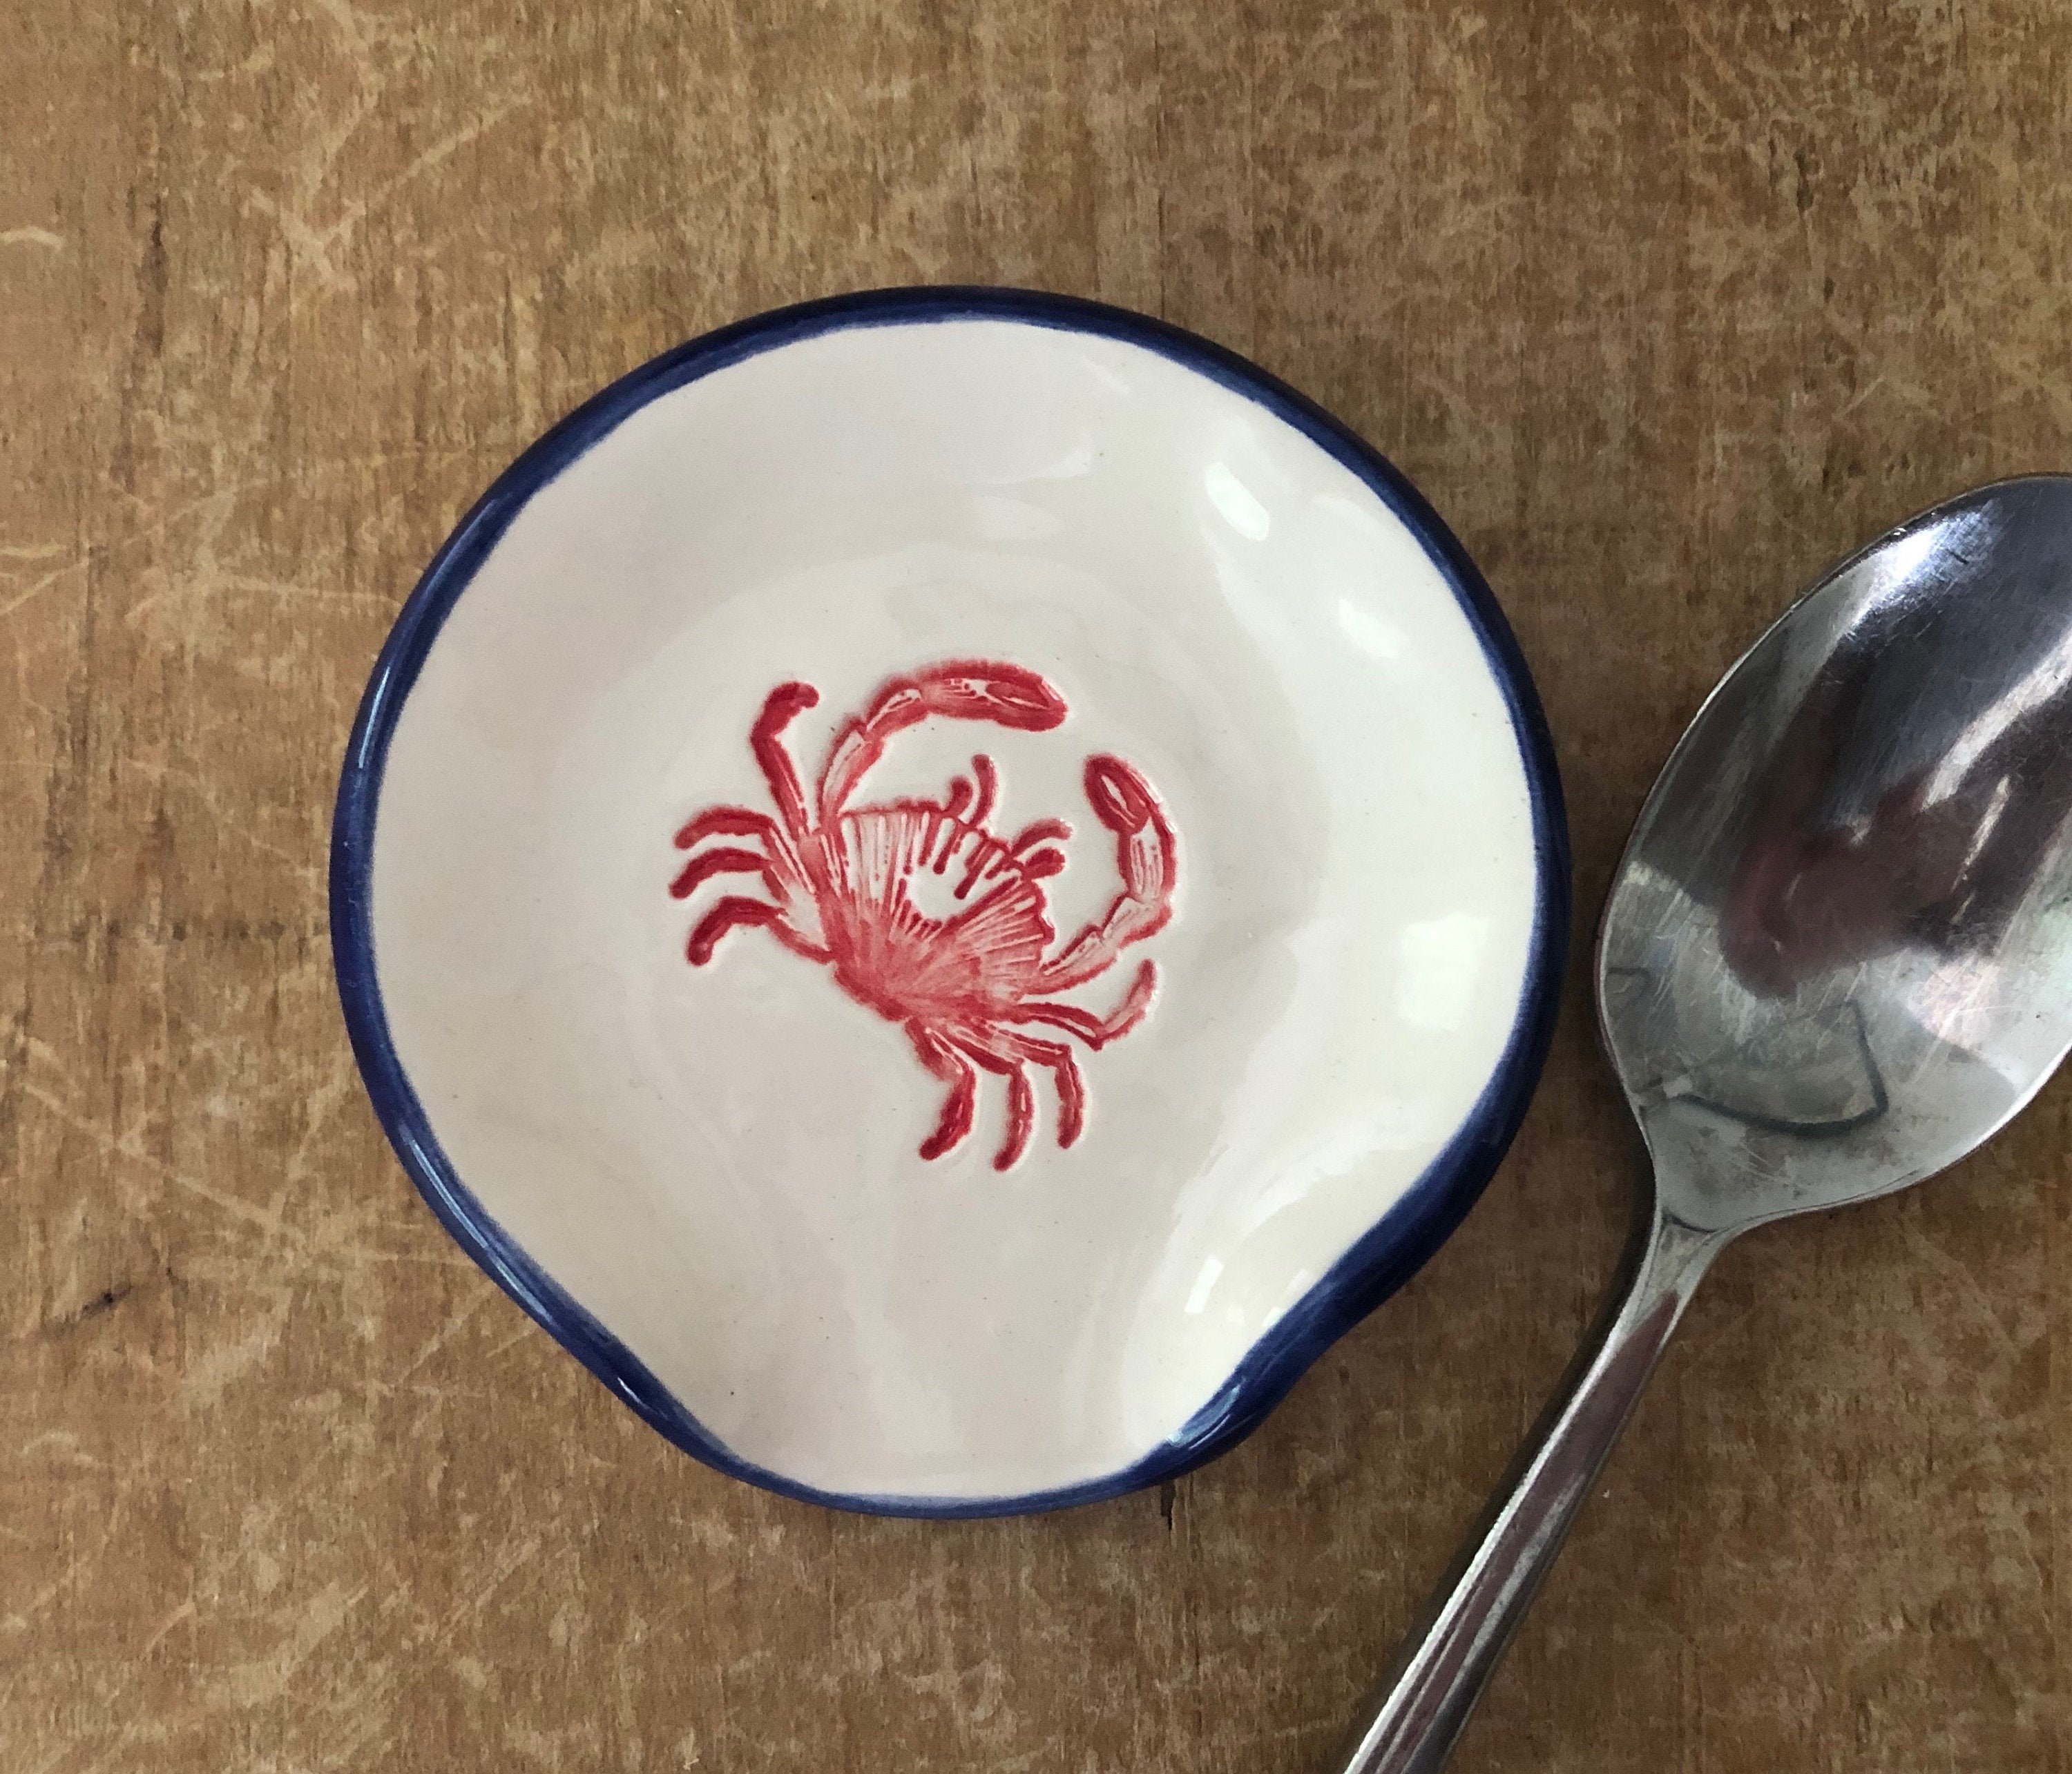 Crab spoon rest brings the beach to your stove top. Handmade by